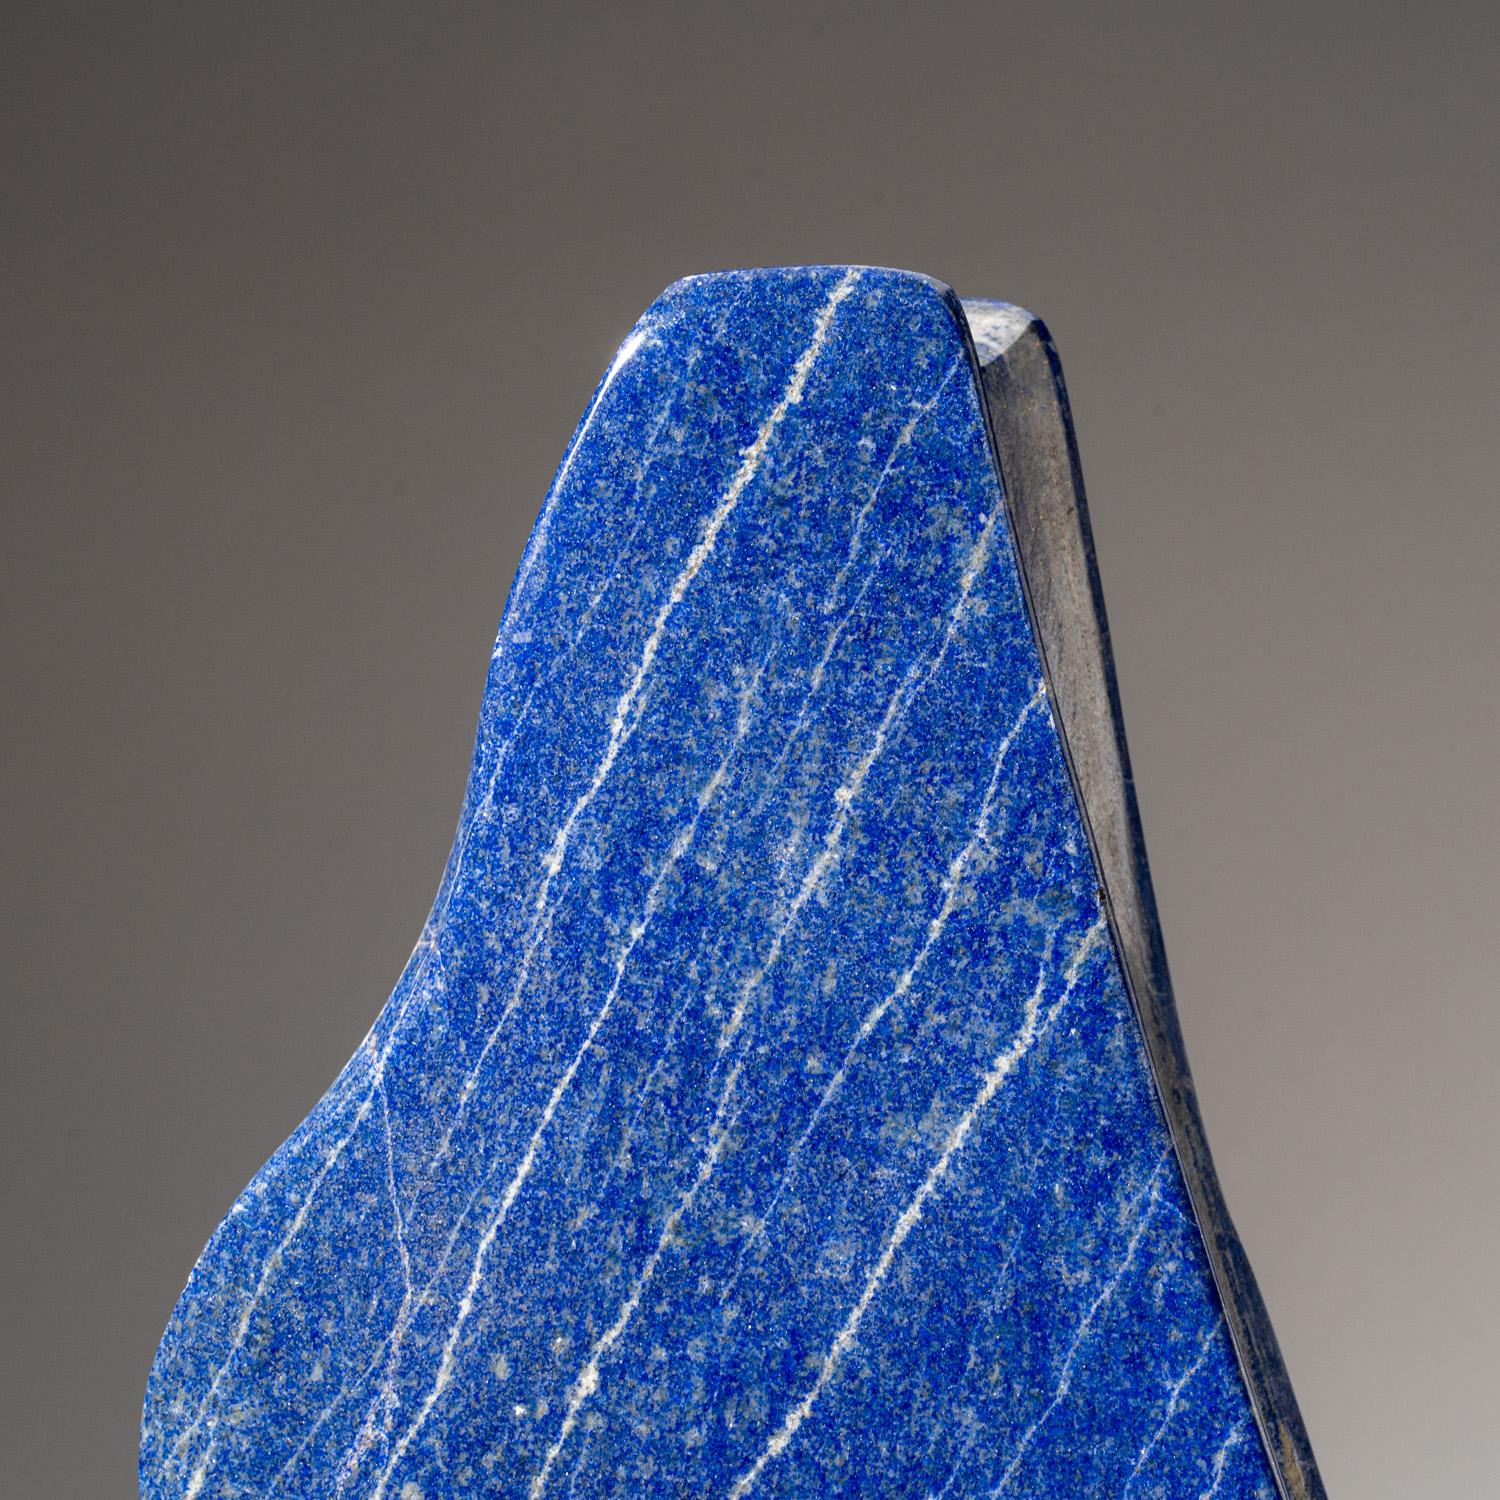 Contemporary Polished Lapis Lazuli Freeform from Afghanistan (7.4 lbs) For Sale